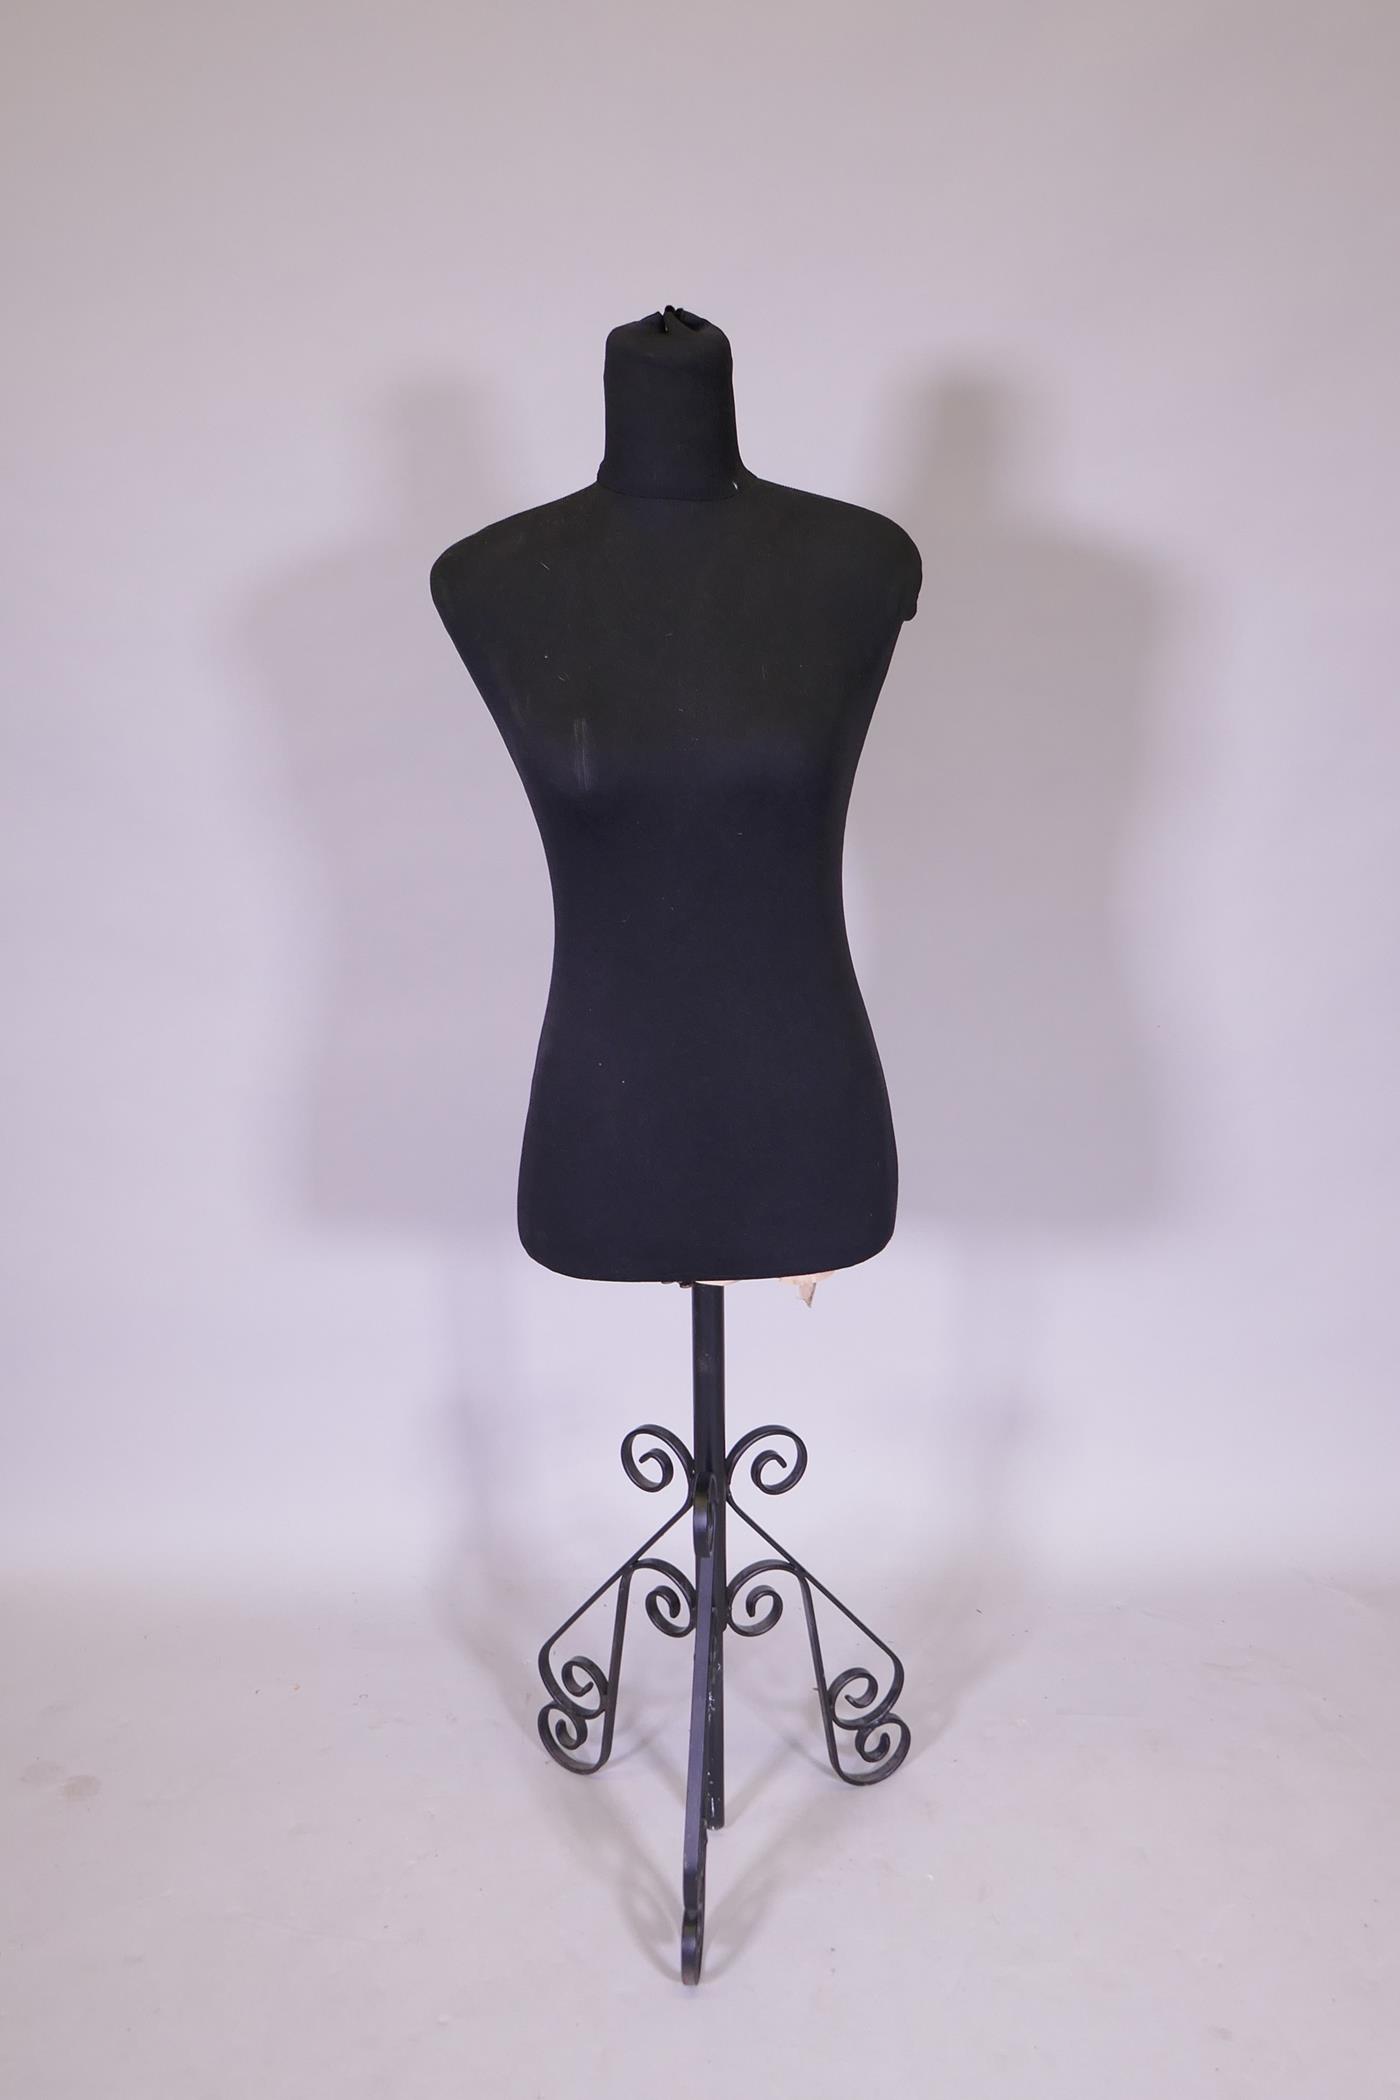 A tailor's dummy on an adjustable wrought metal base, 128cm high